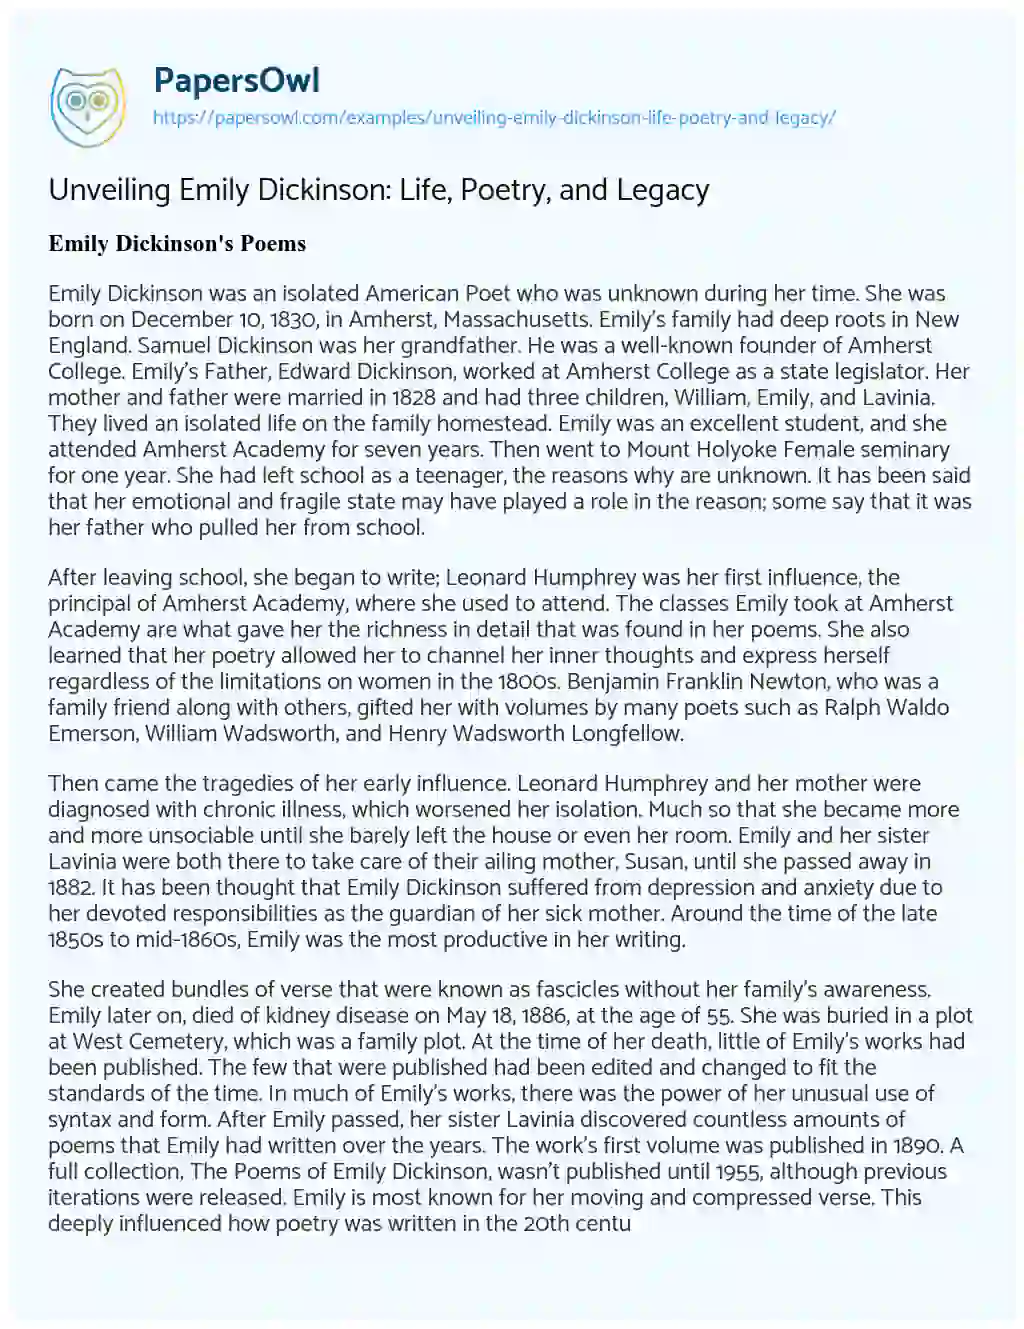 Essay on Unveiling Emily Dickinson: Life, Poetry, and Legacy